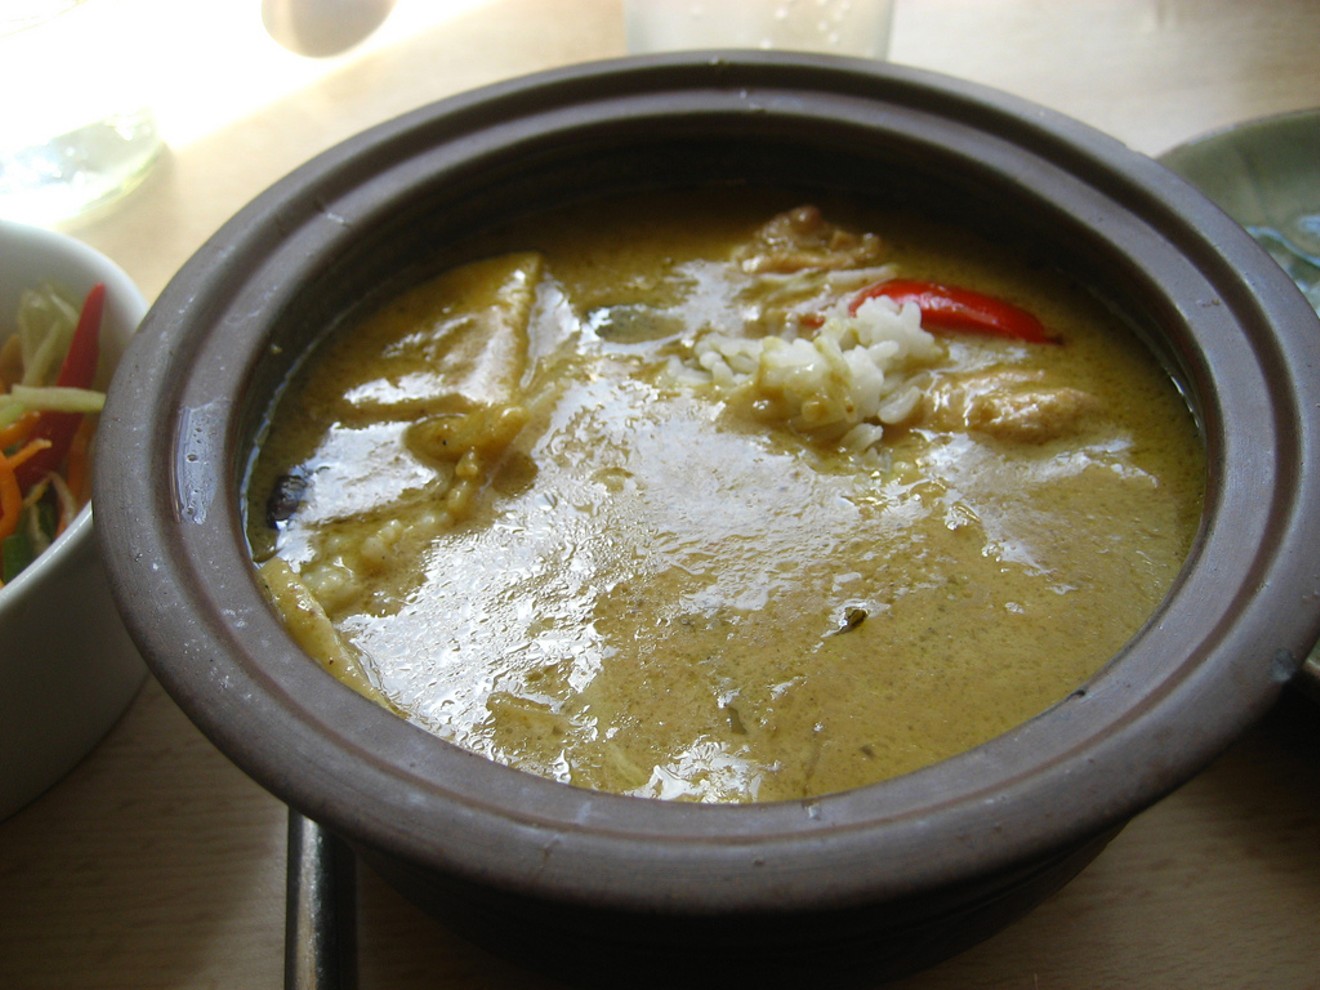 Check out a Houston gem to make your own version of Thai green curry at home.